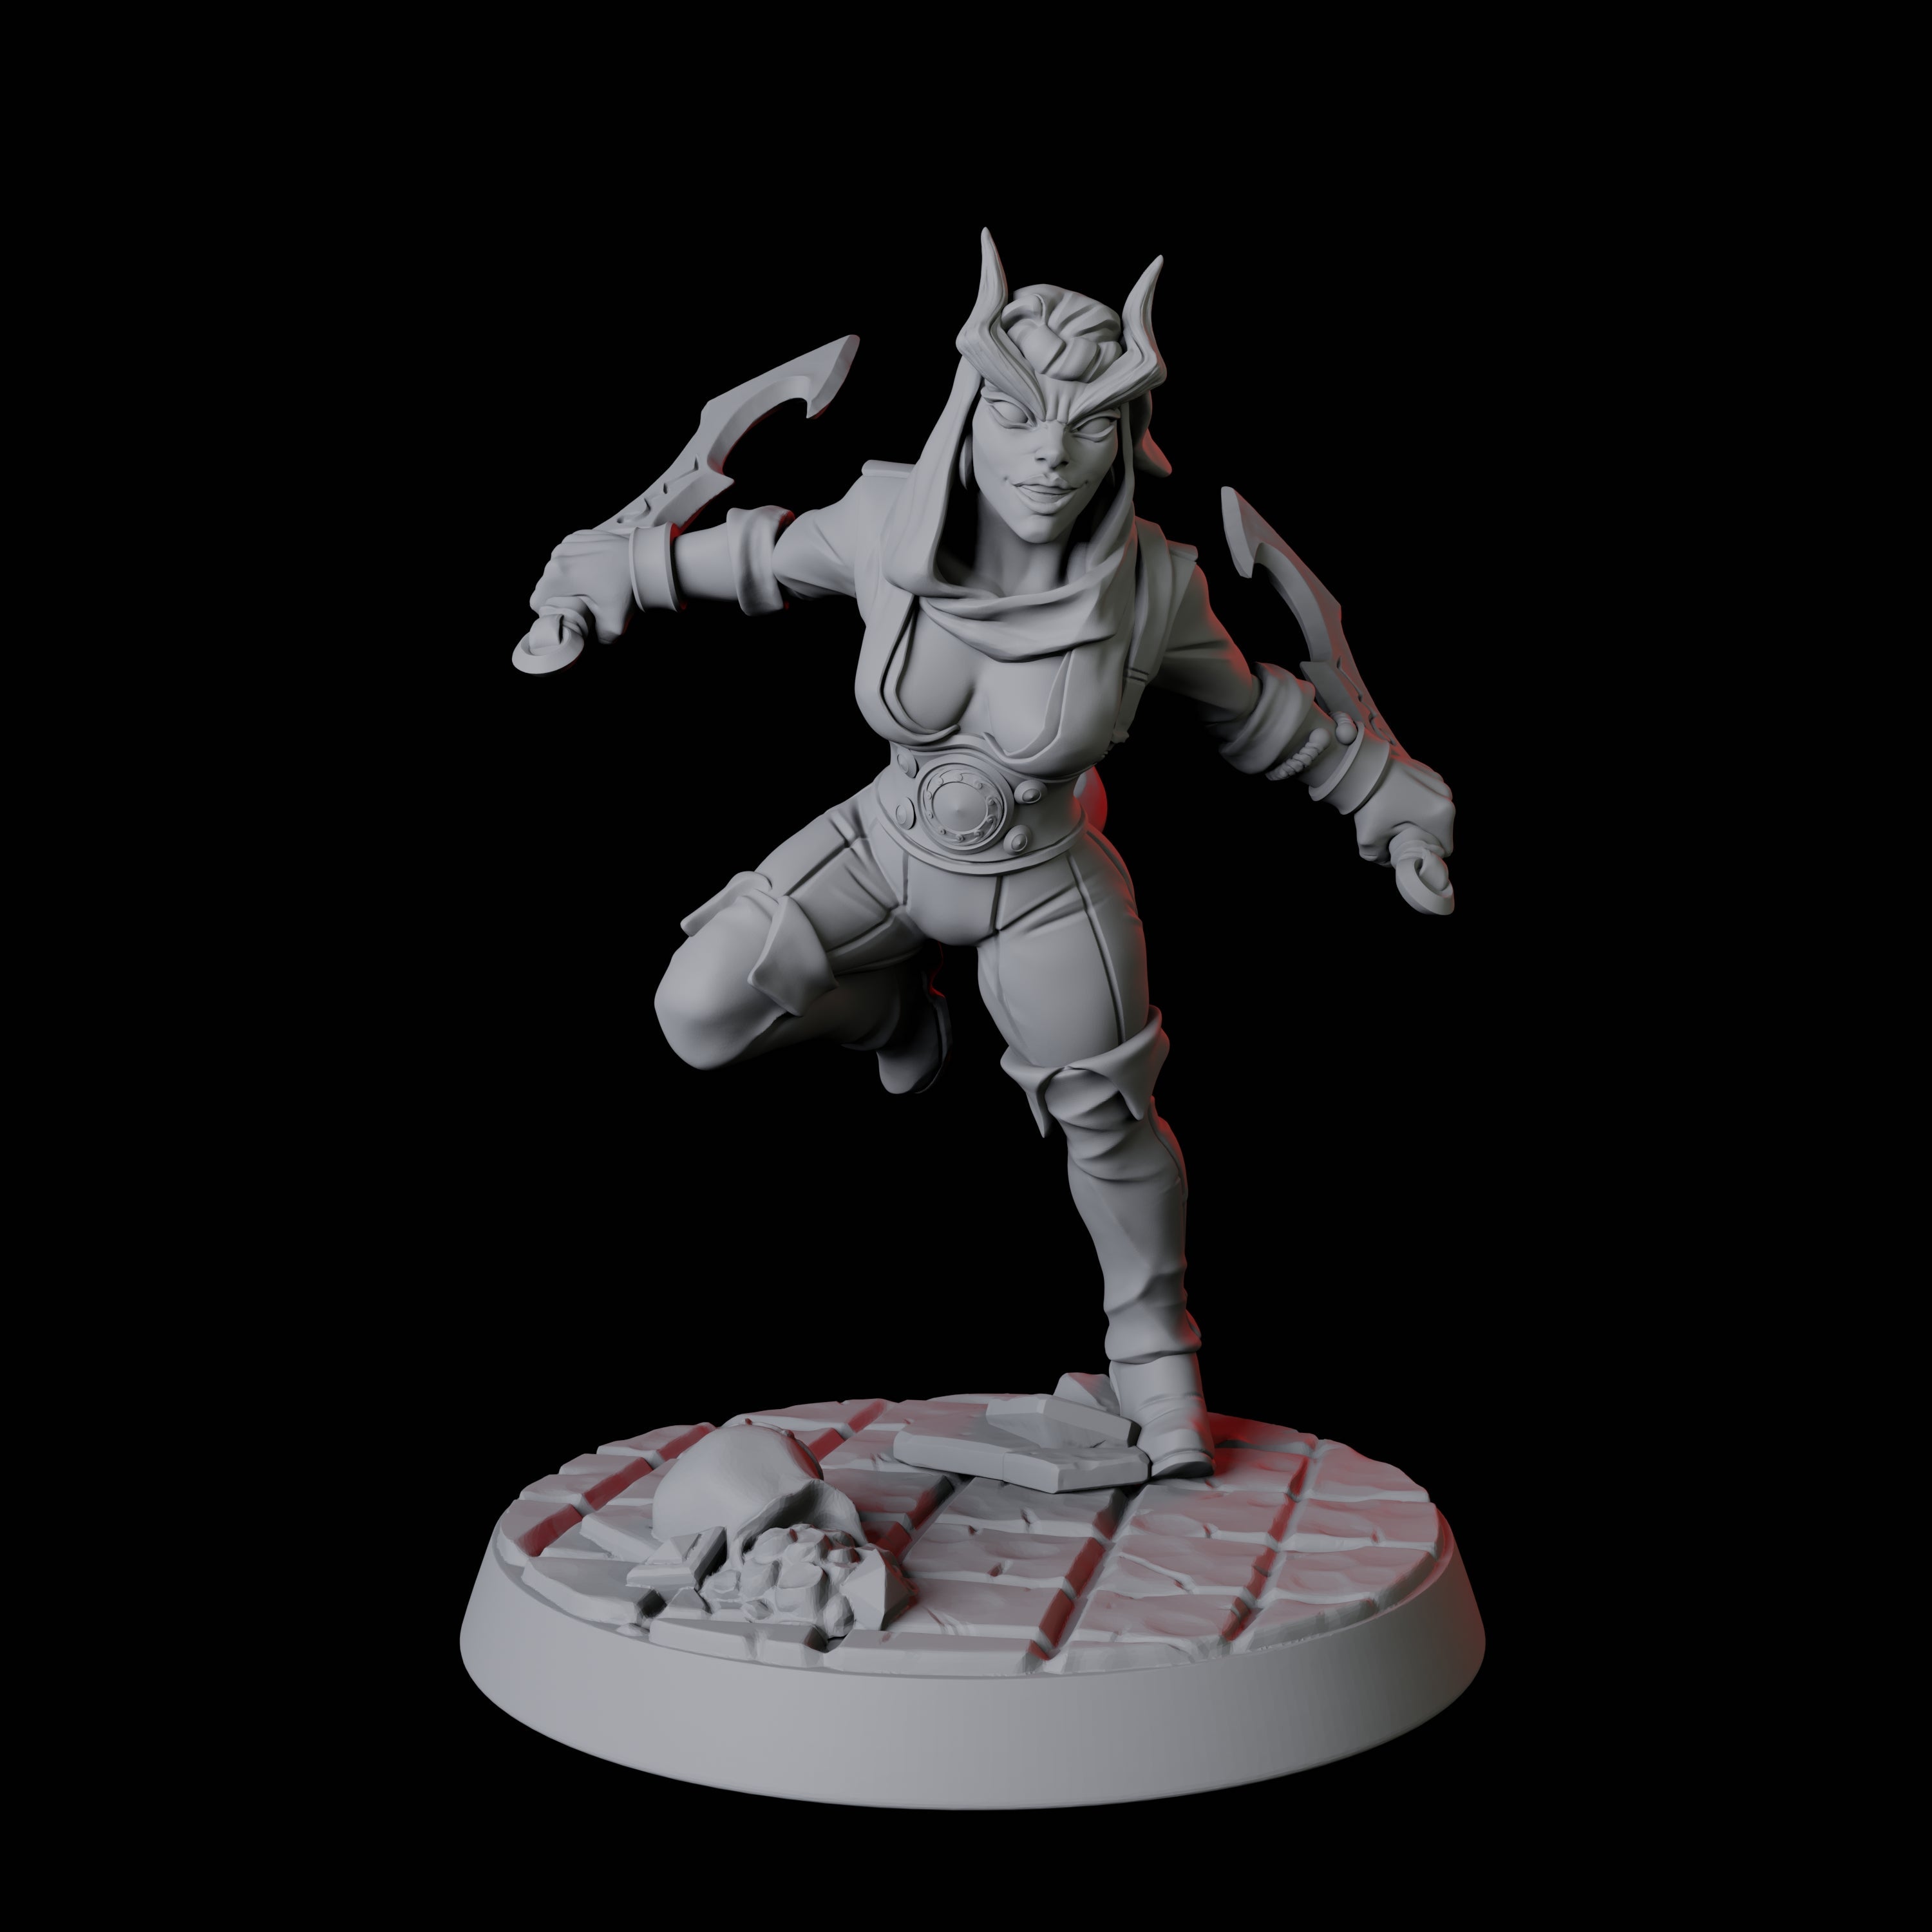 Tiefling Rogue D Miniature for Dungeons and Dragons, Pathfinder or other TTRPGs